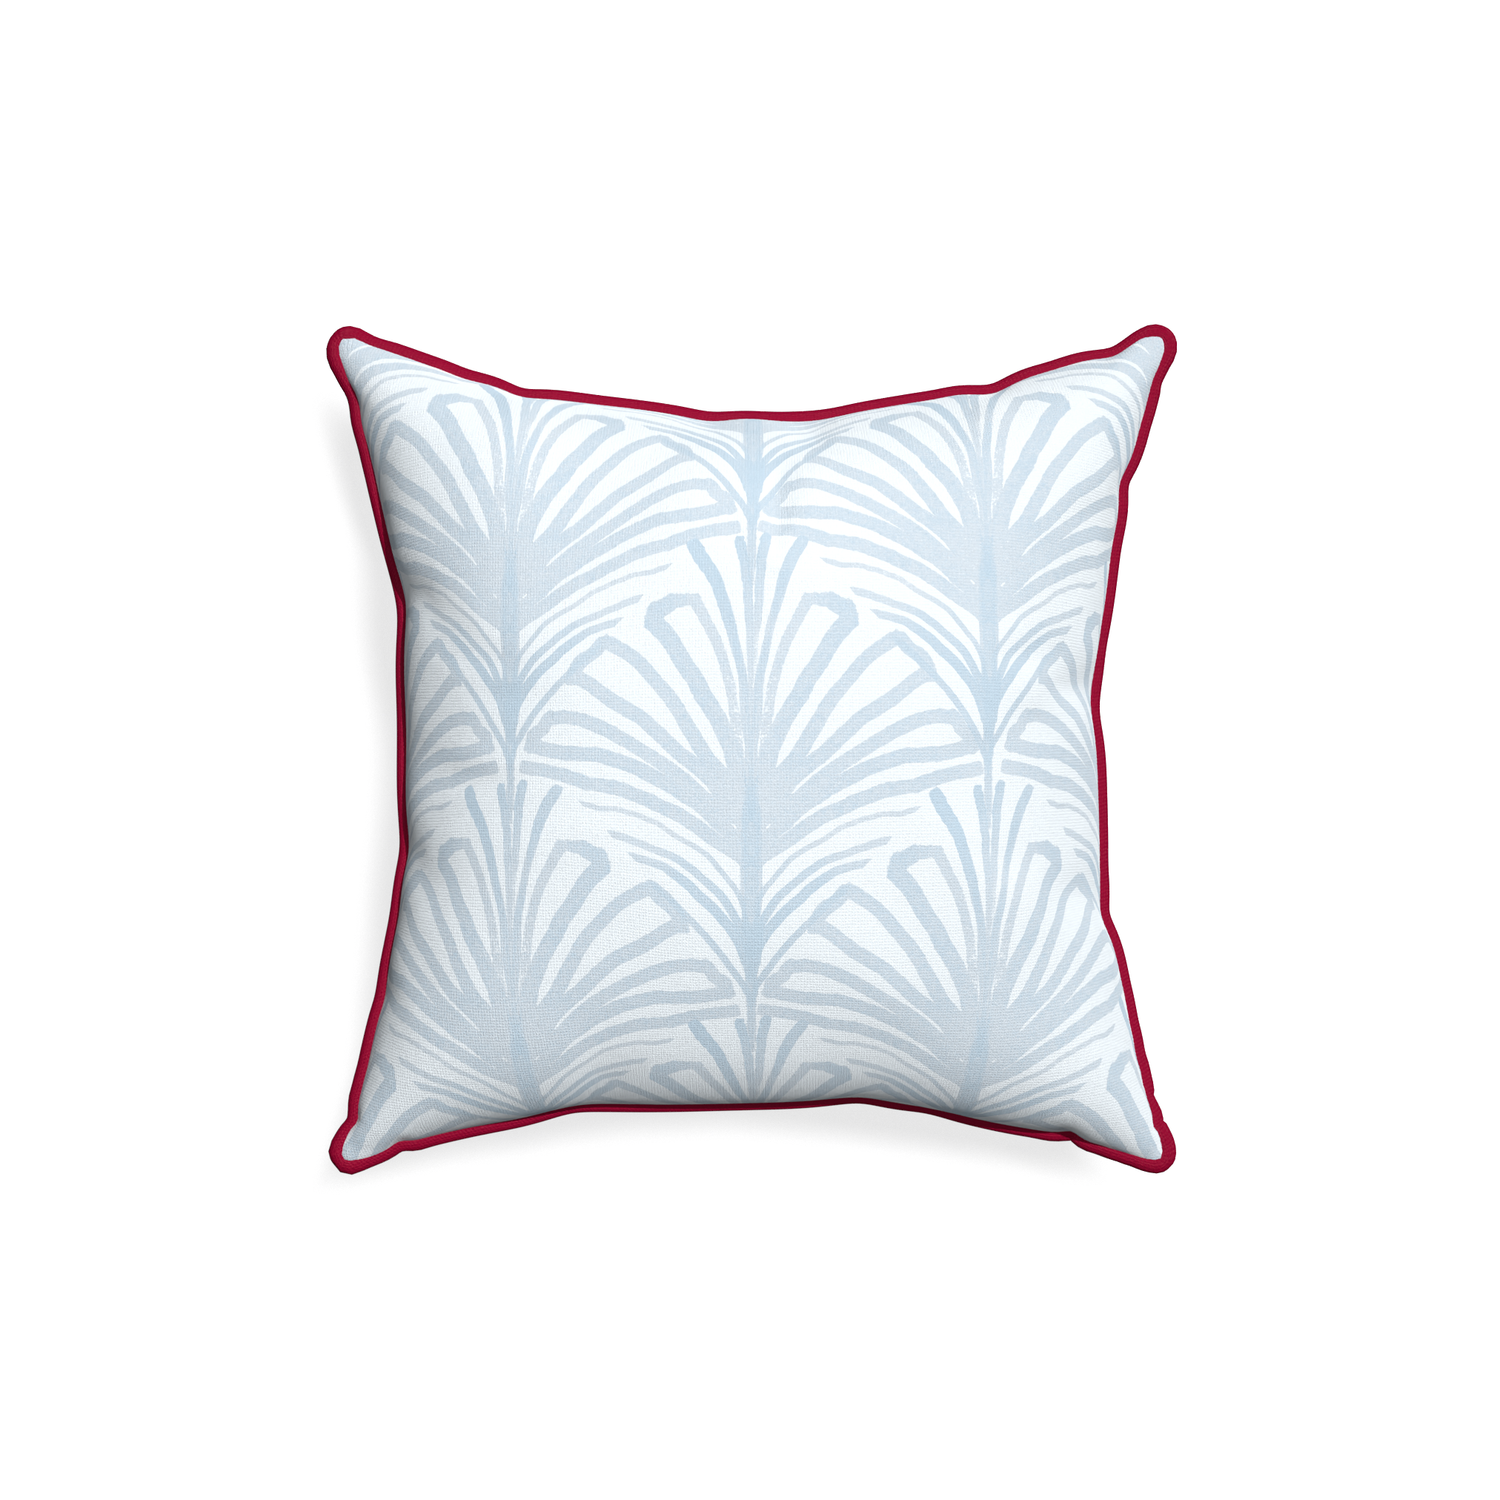 18-square suzy sky custom pillow with raspberry piping on white background